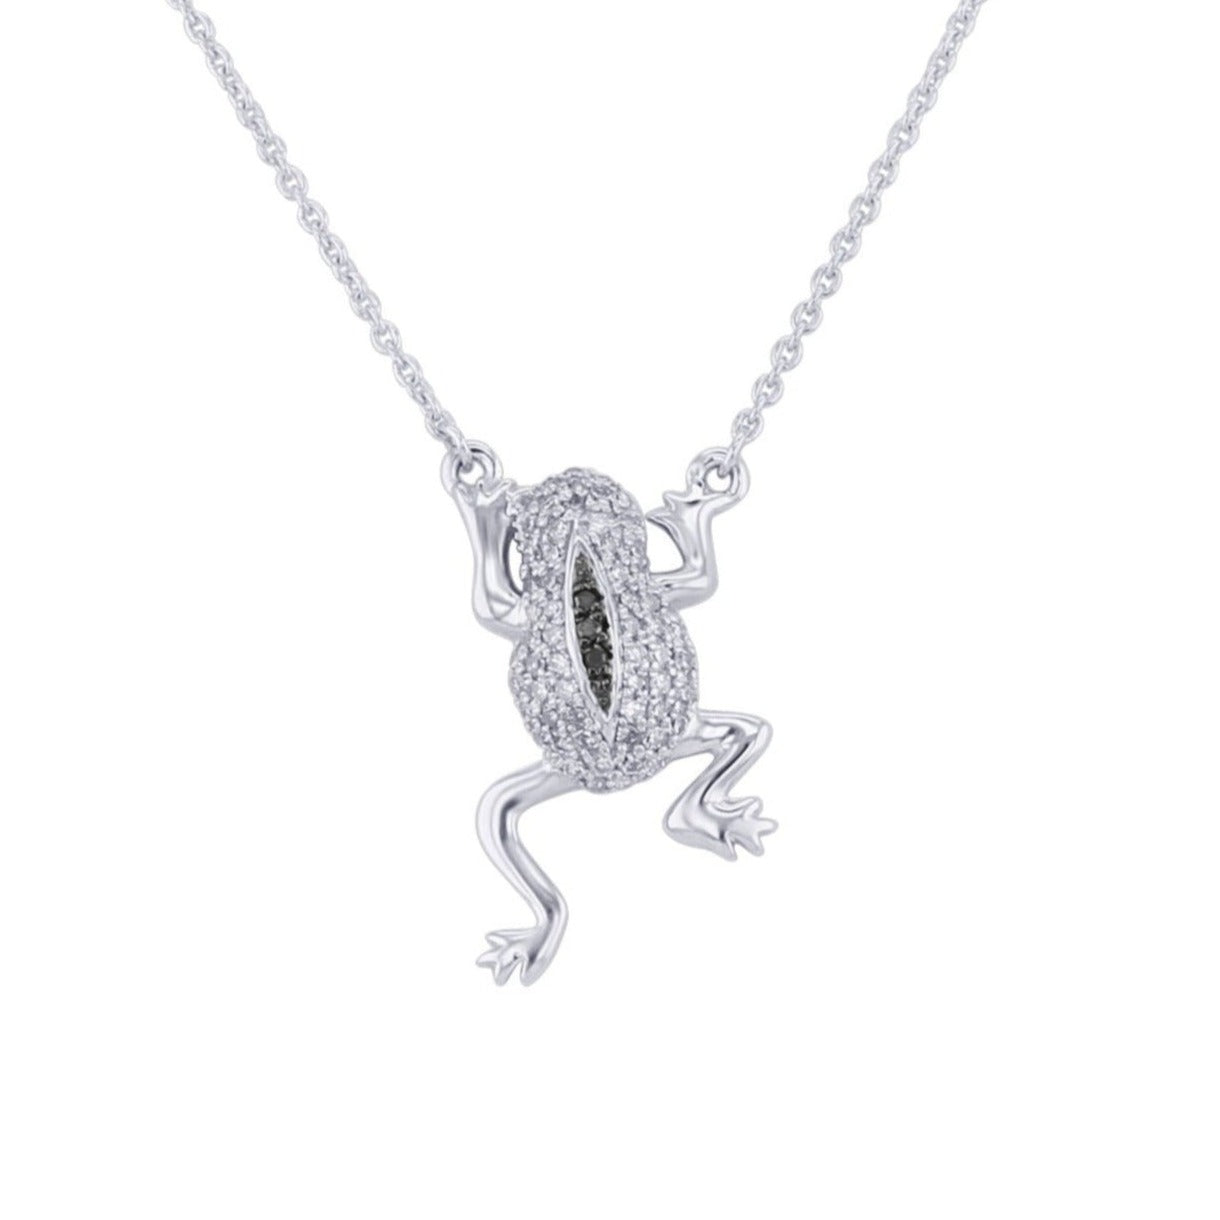 Silver Frog Black and White Diamond Necklace